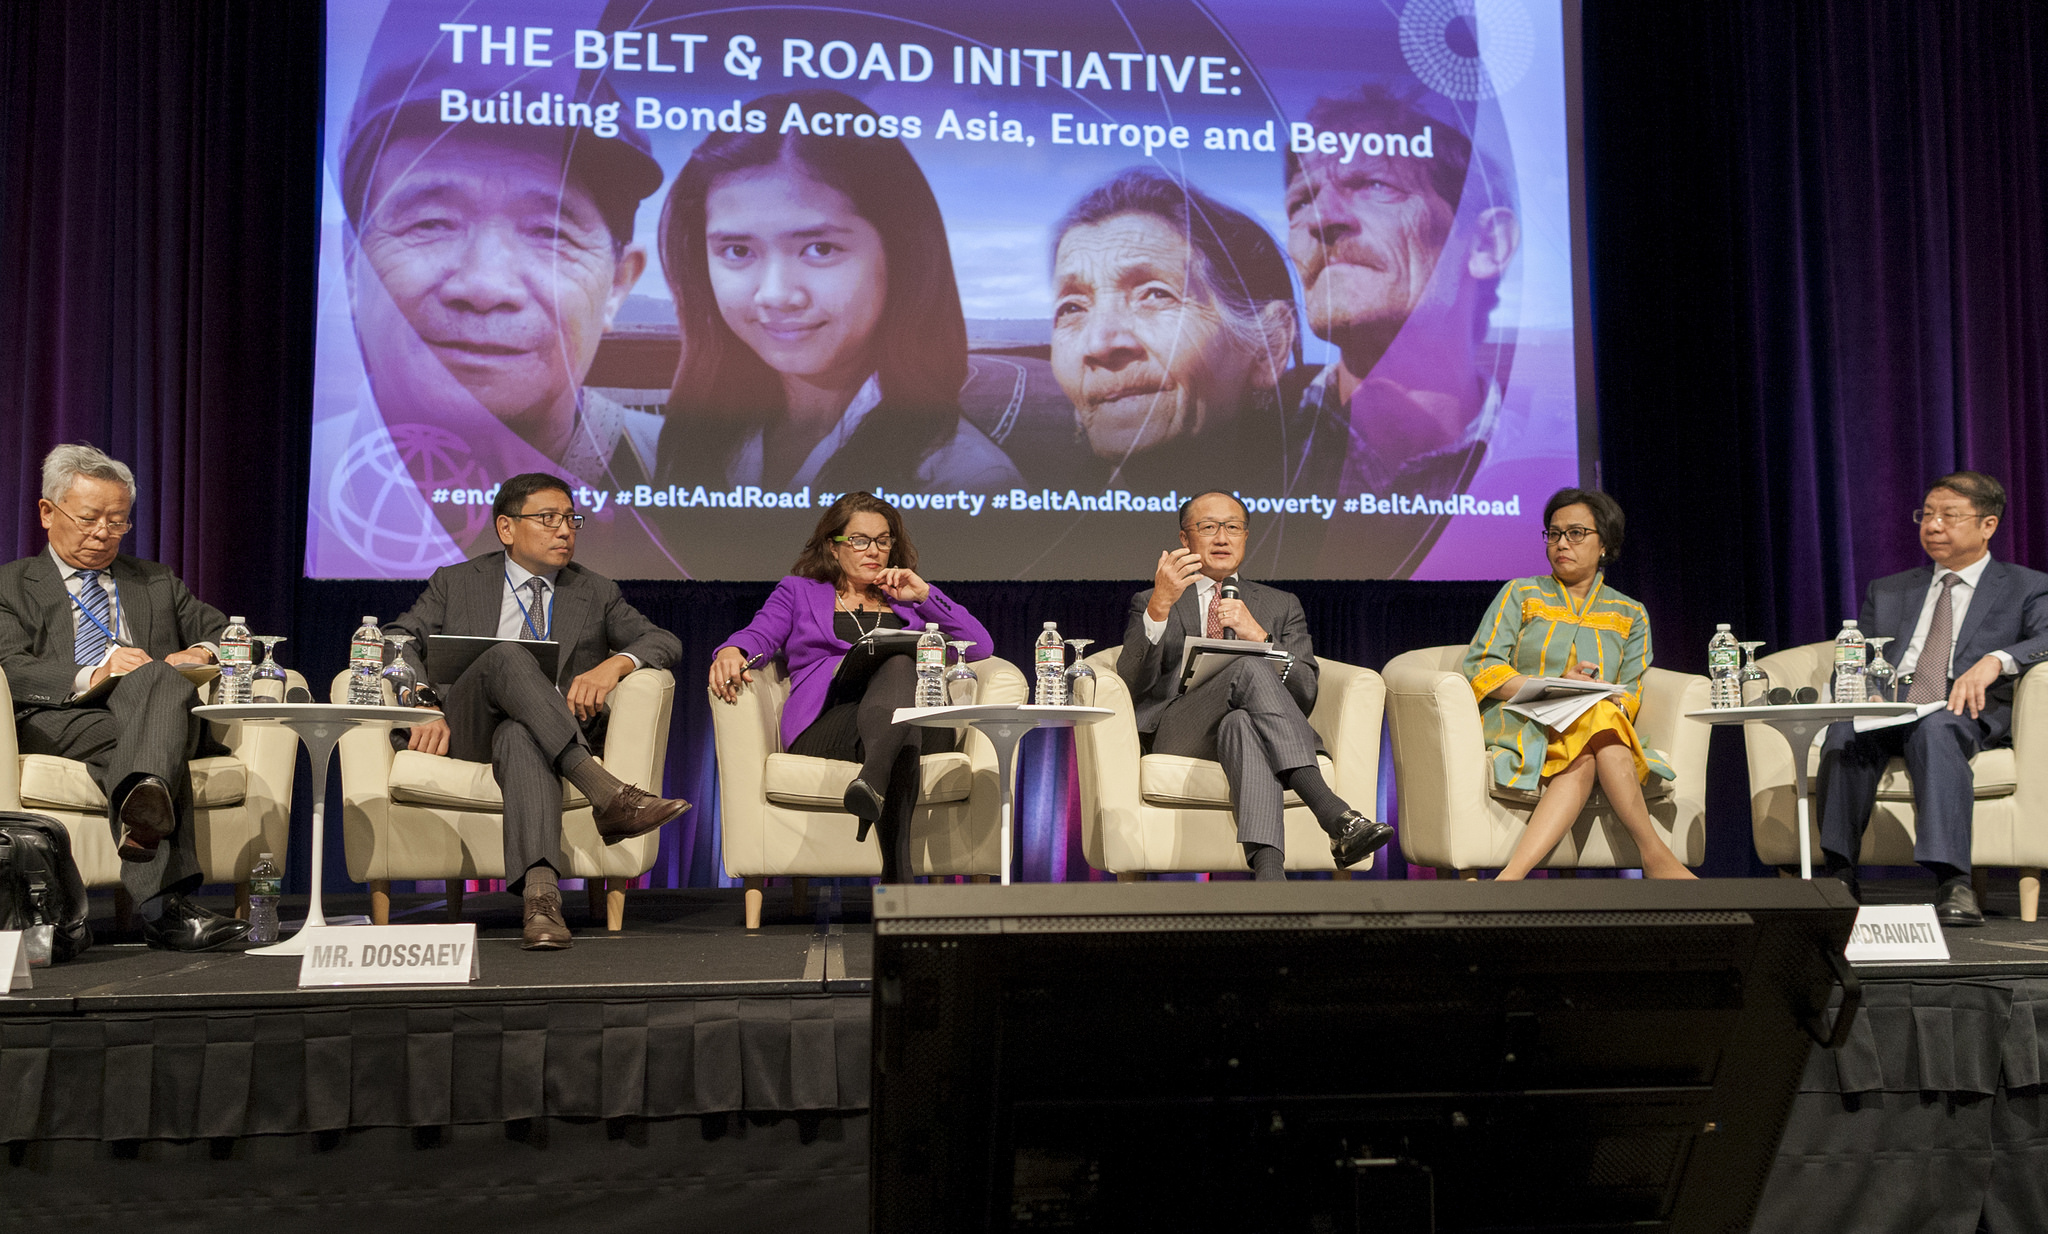 2017 World Bank/IMF Annual Meetings - panel on the Belt & Road Initiative (World Bank/Flickr/CC BY-NC-ND 2.0)